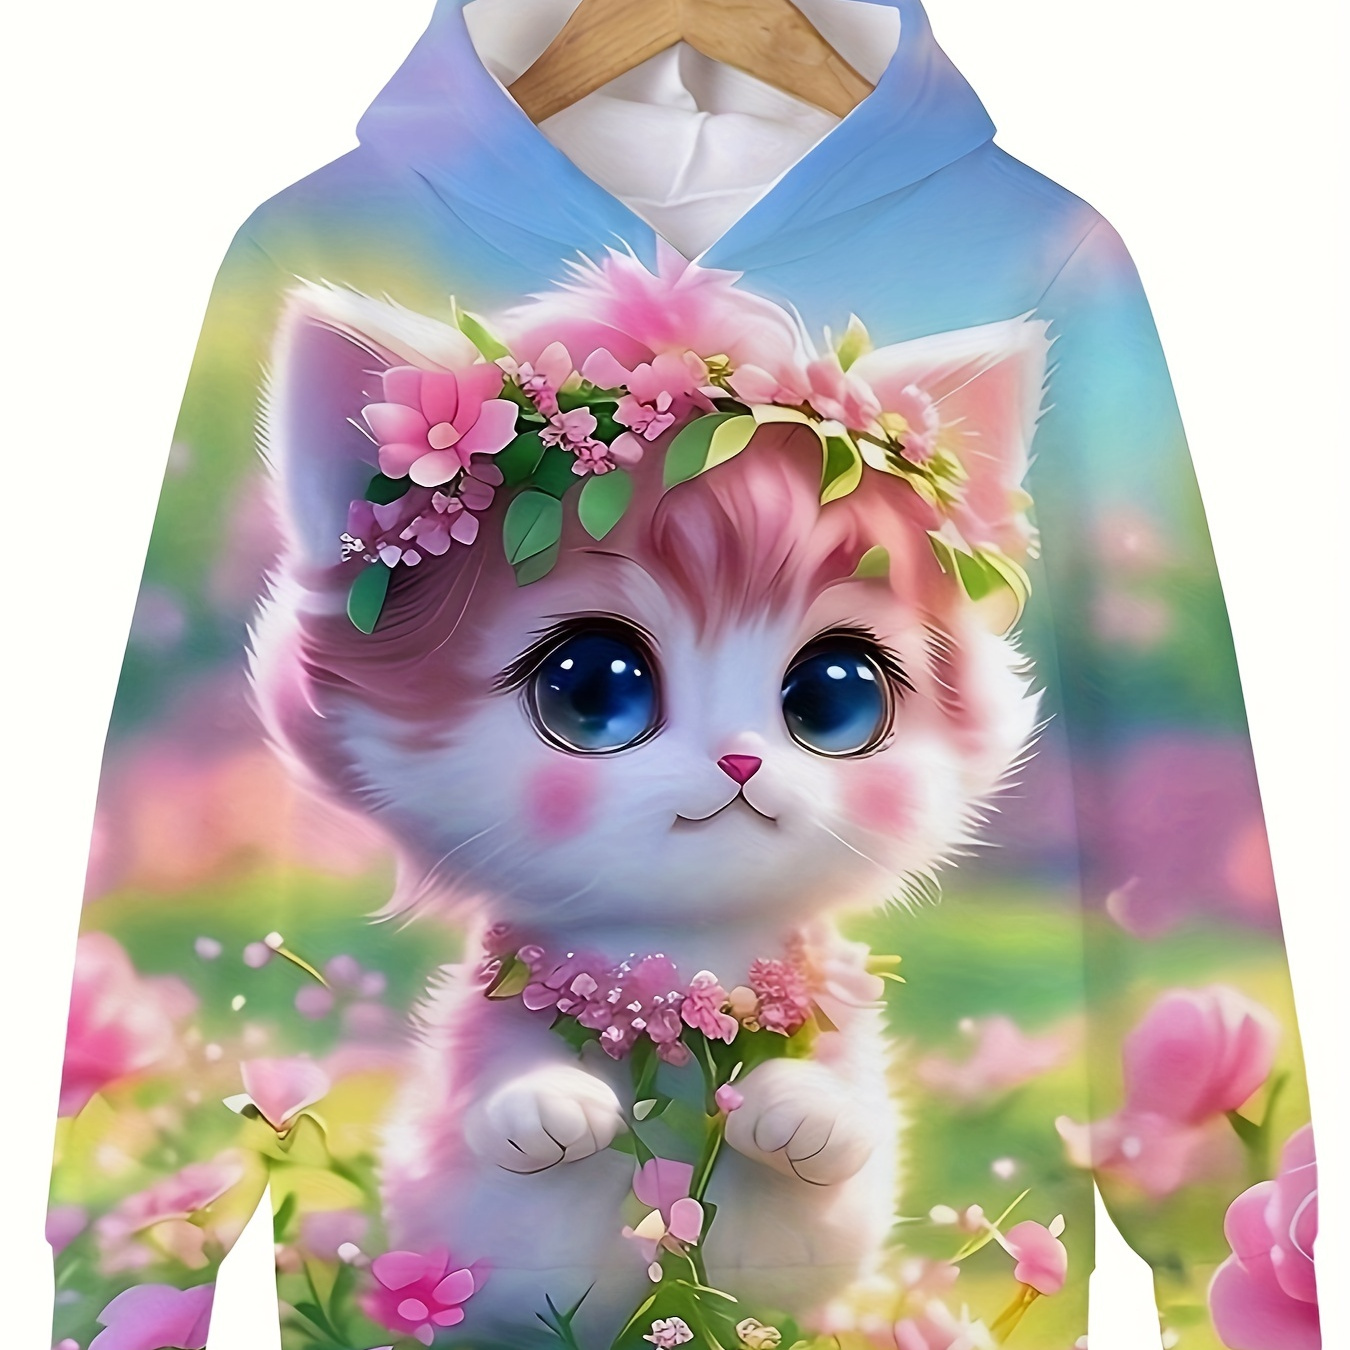 

Adorable Flower Kitty In The Garden Graphic Hoodies Long Sleeve Hooded Sweatshirt For Sports Spring